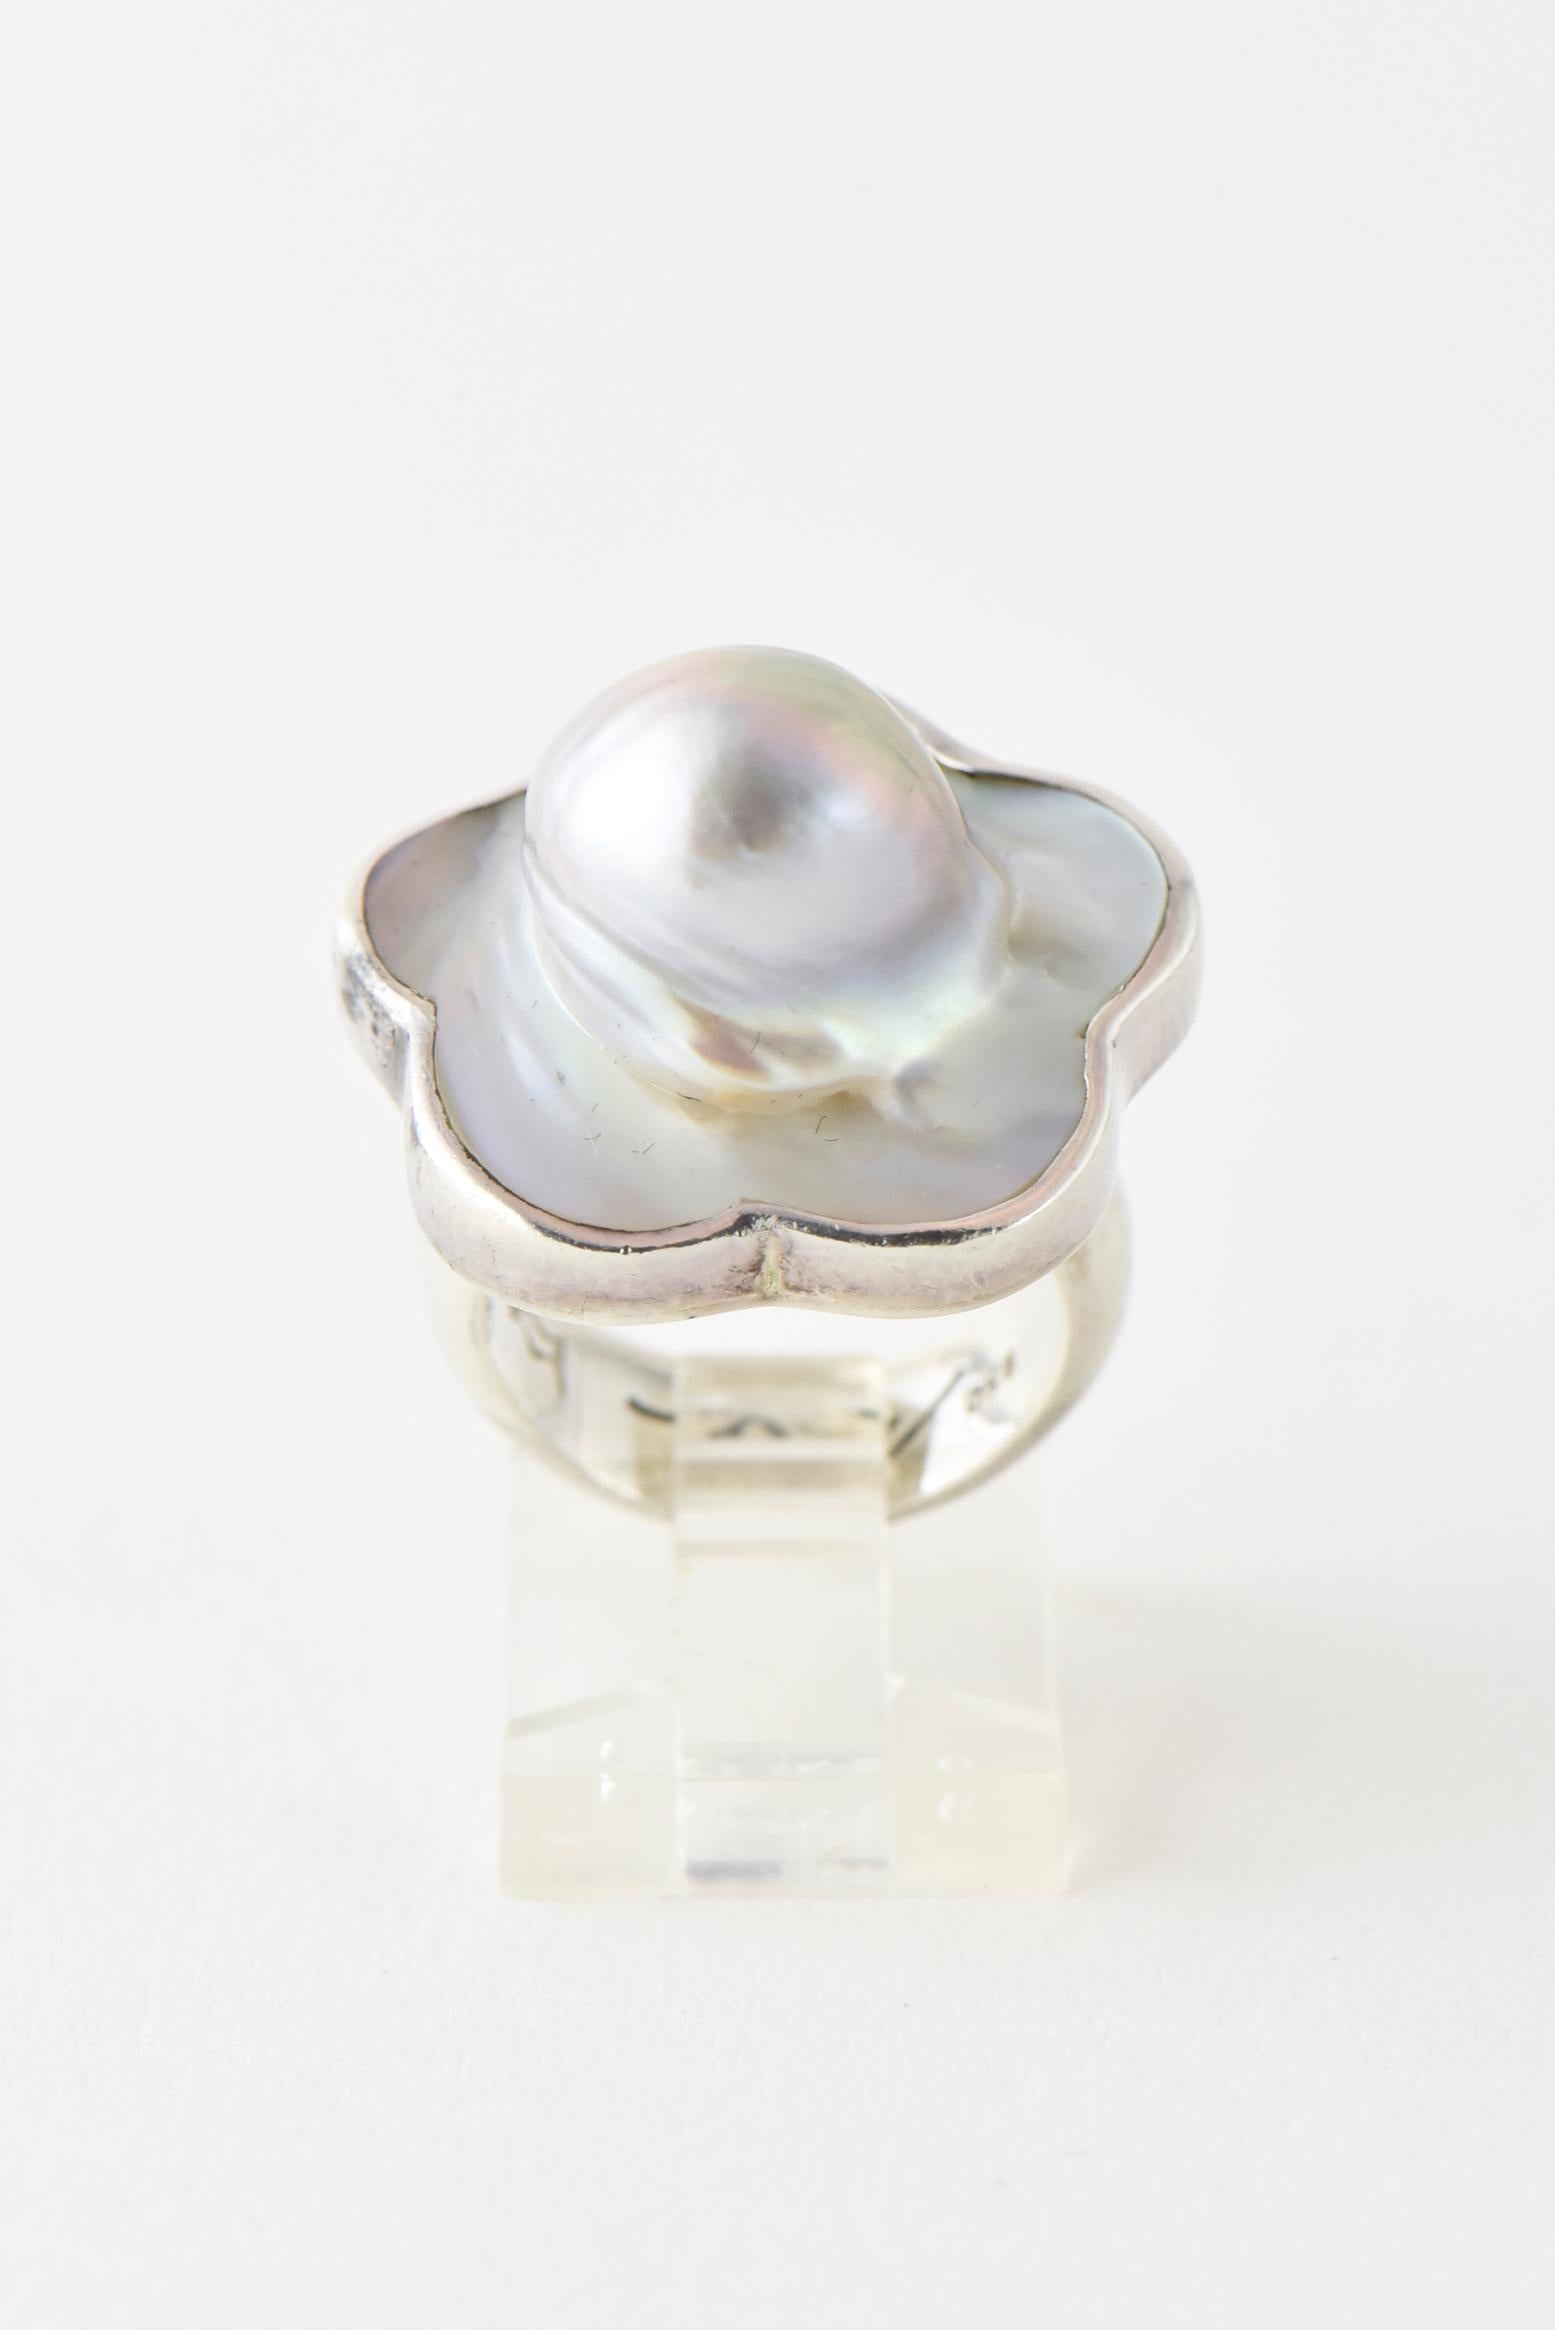 Handmade blister pearl flower mounted in a sterling silver ring by Barry Brinker. 

U.S. size: 5.25. Marked: 925.
